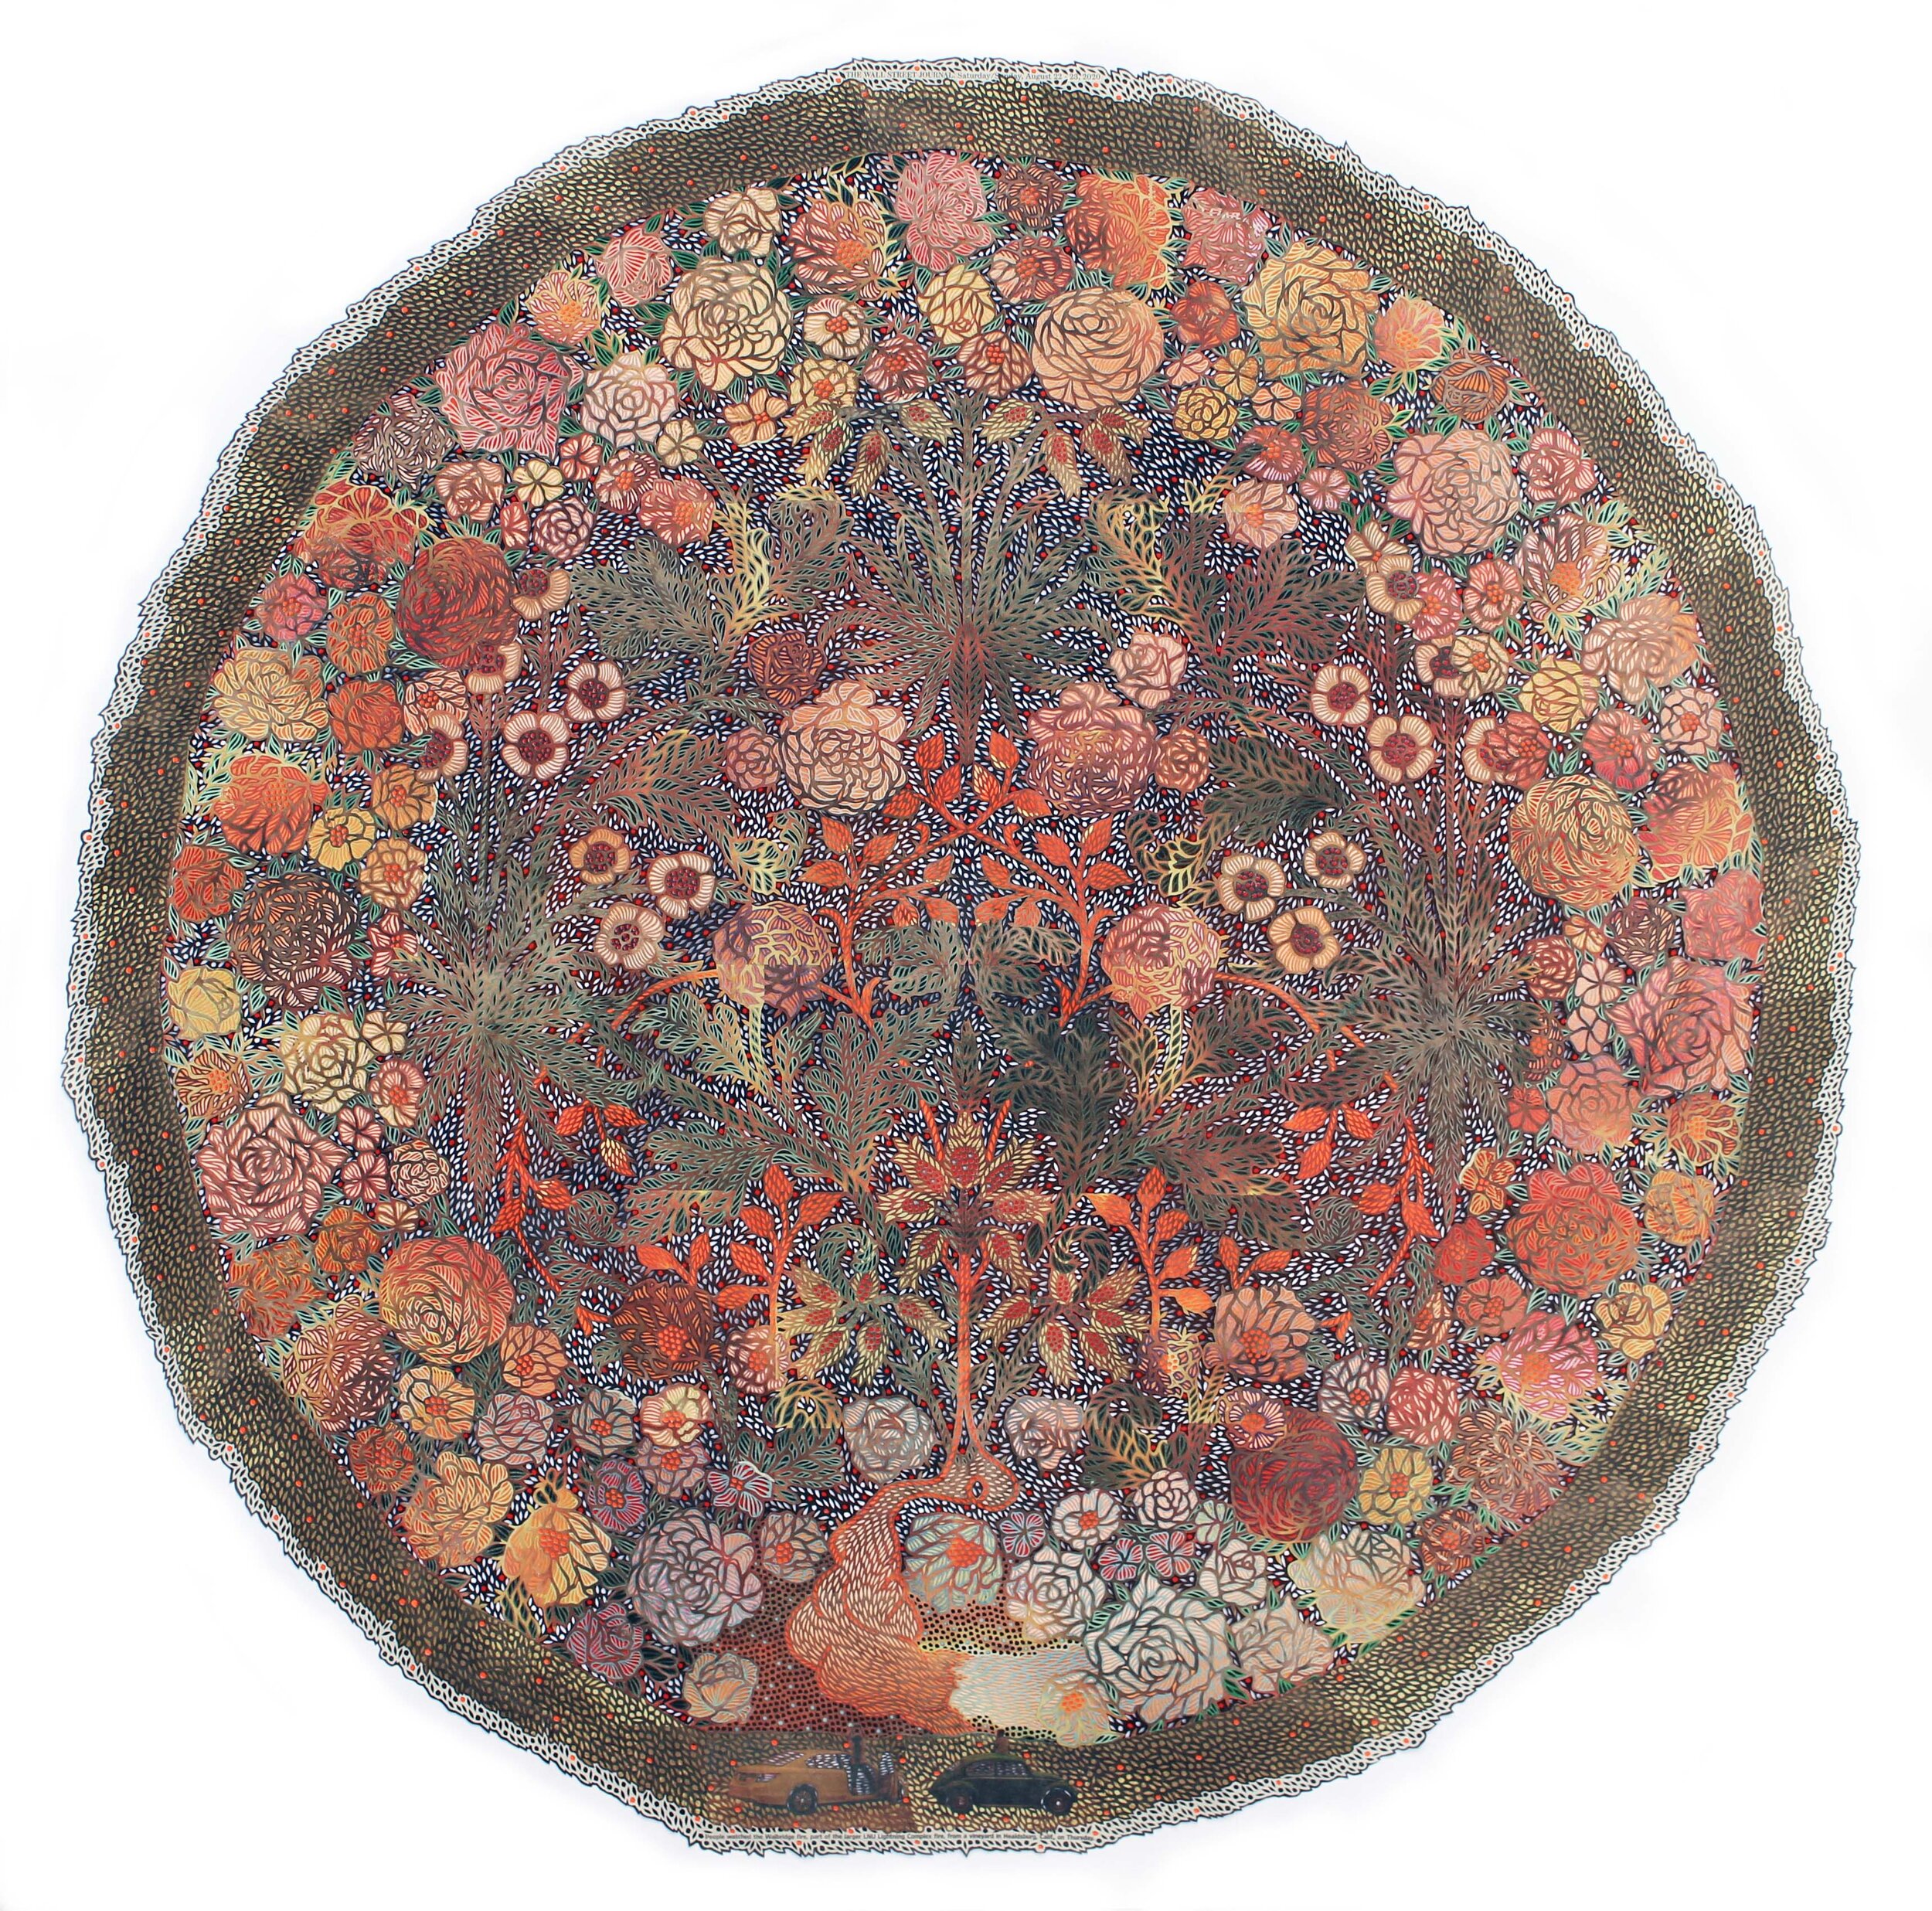 CorteÌge floristique, California Blazes, The Wall Street Journal, Saturday Sunday, August 22-23, 2020, collage of newspapers and japanese papers cut with x-acto knife, 33”  diameter